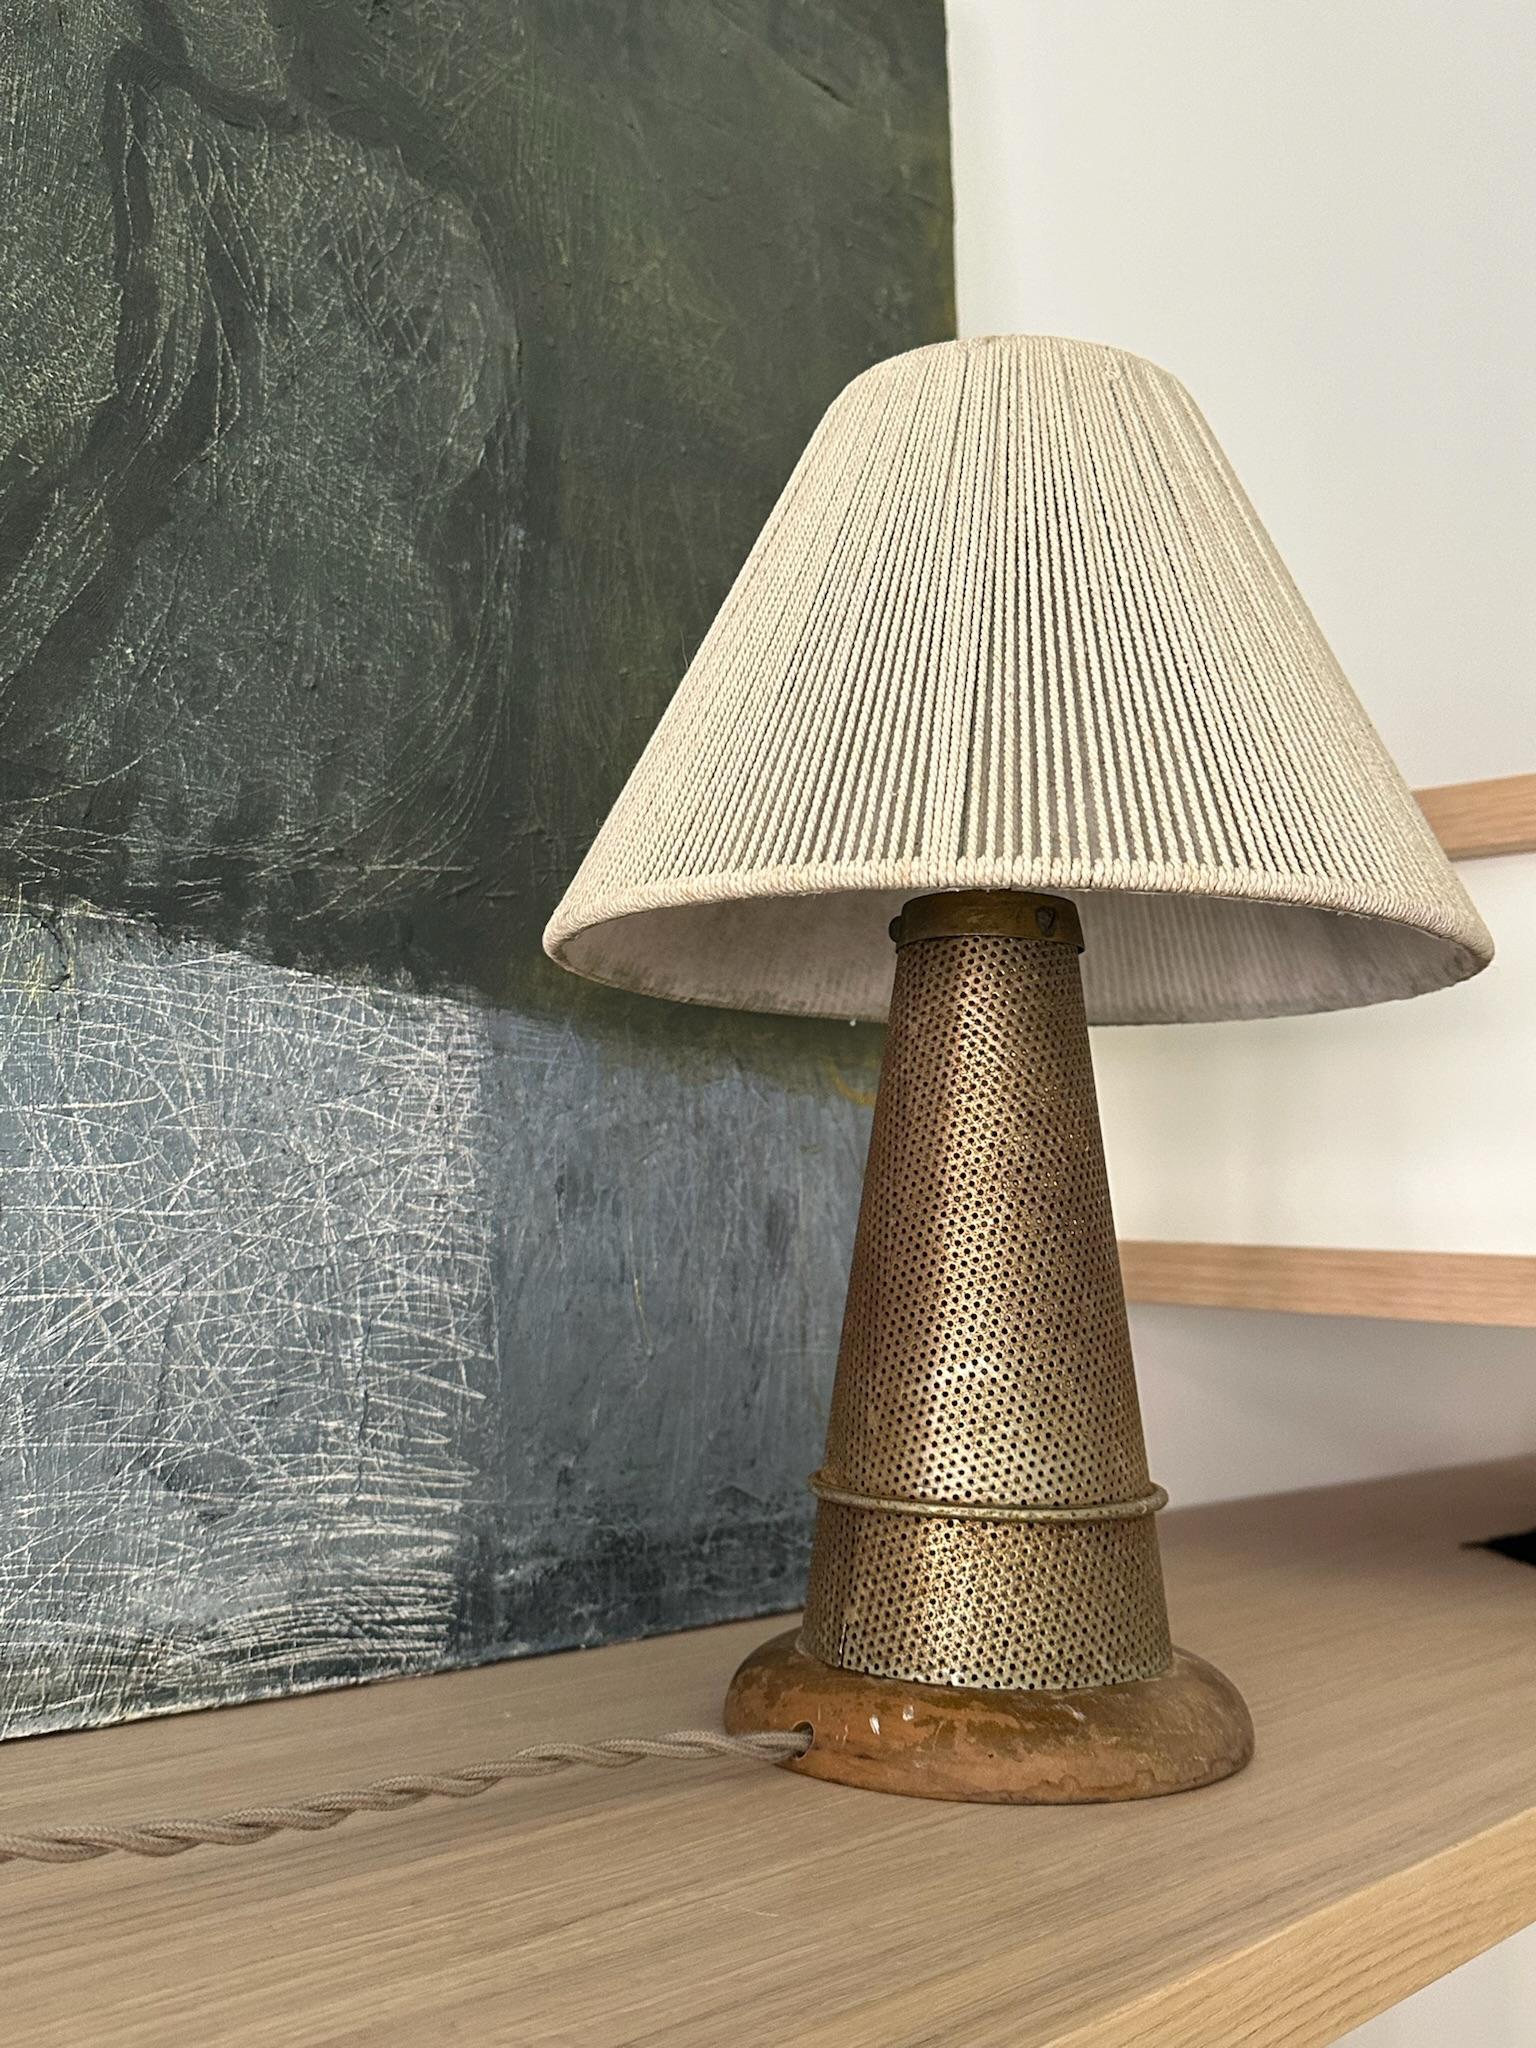 Organic Modern Perforated Metal Table Lamp For Sale